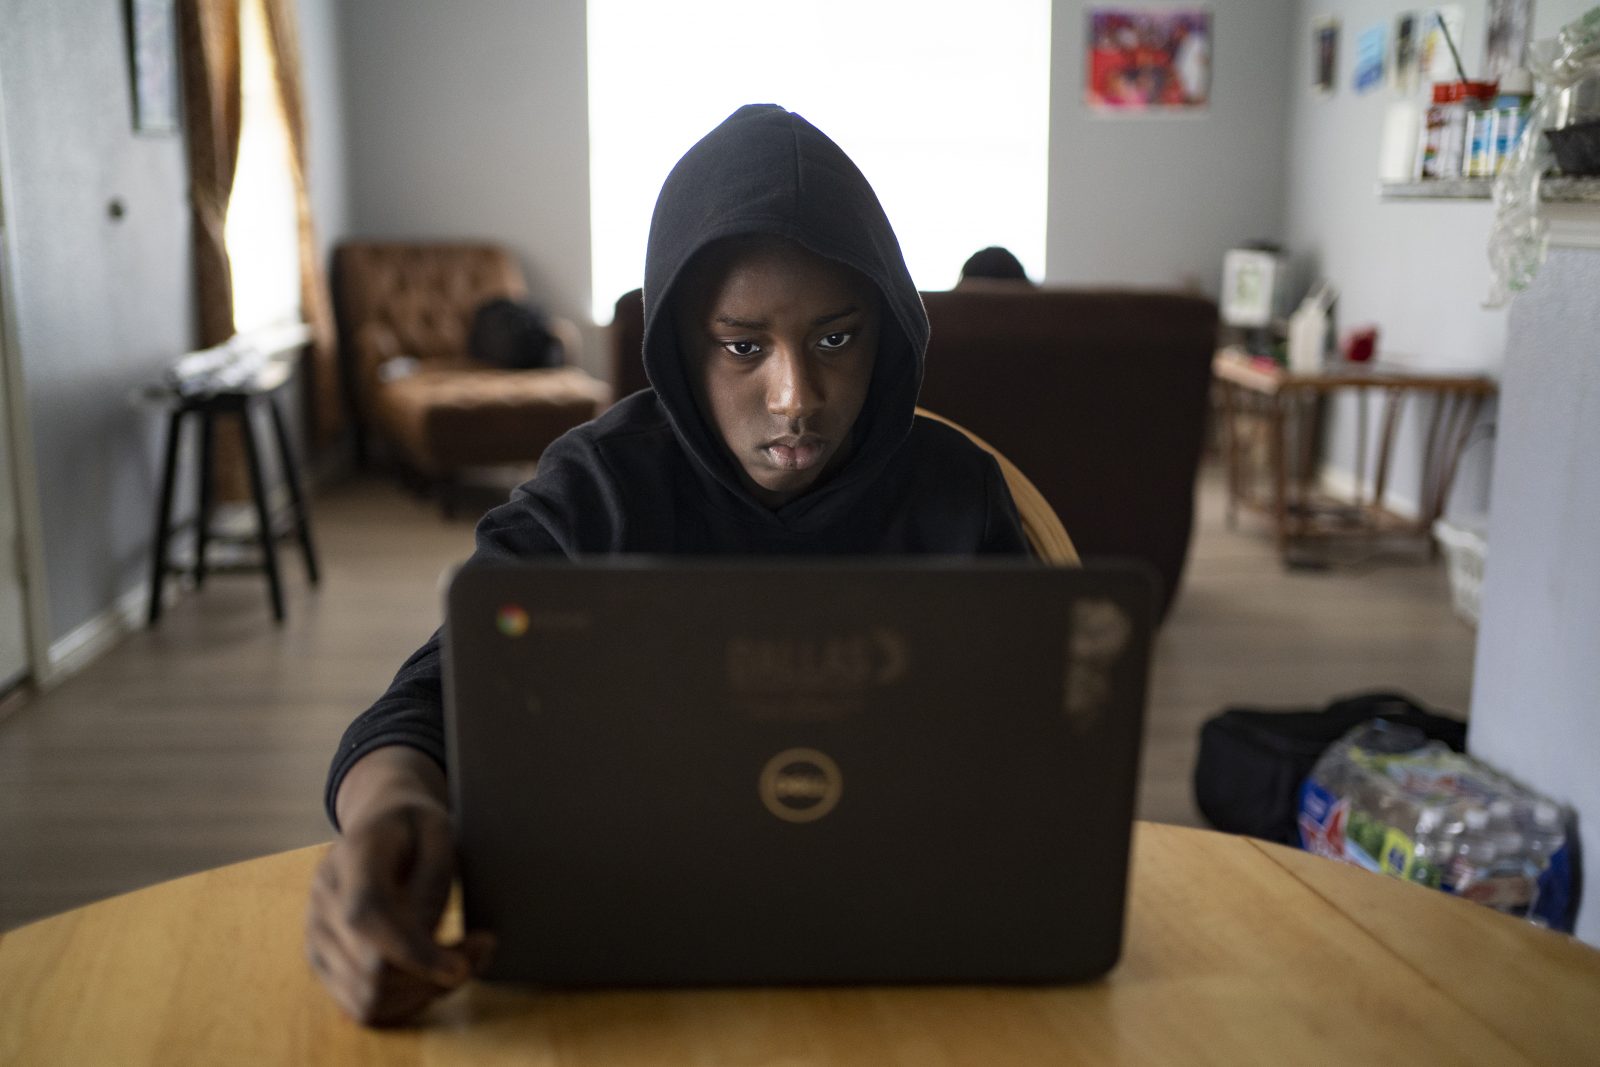 TeQuan Showers, a fifth-grader at Charles Rice Learning Center in South Dallas, couldn't attend school virtually because of internet connection issues until Dallas ISD equipped his family with technology to access a new wireless network. Photo by Nitashia Johnson